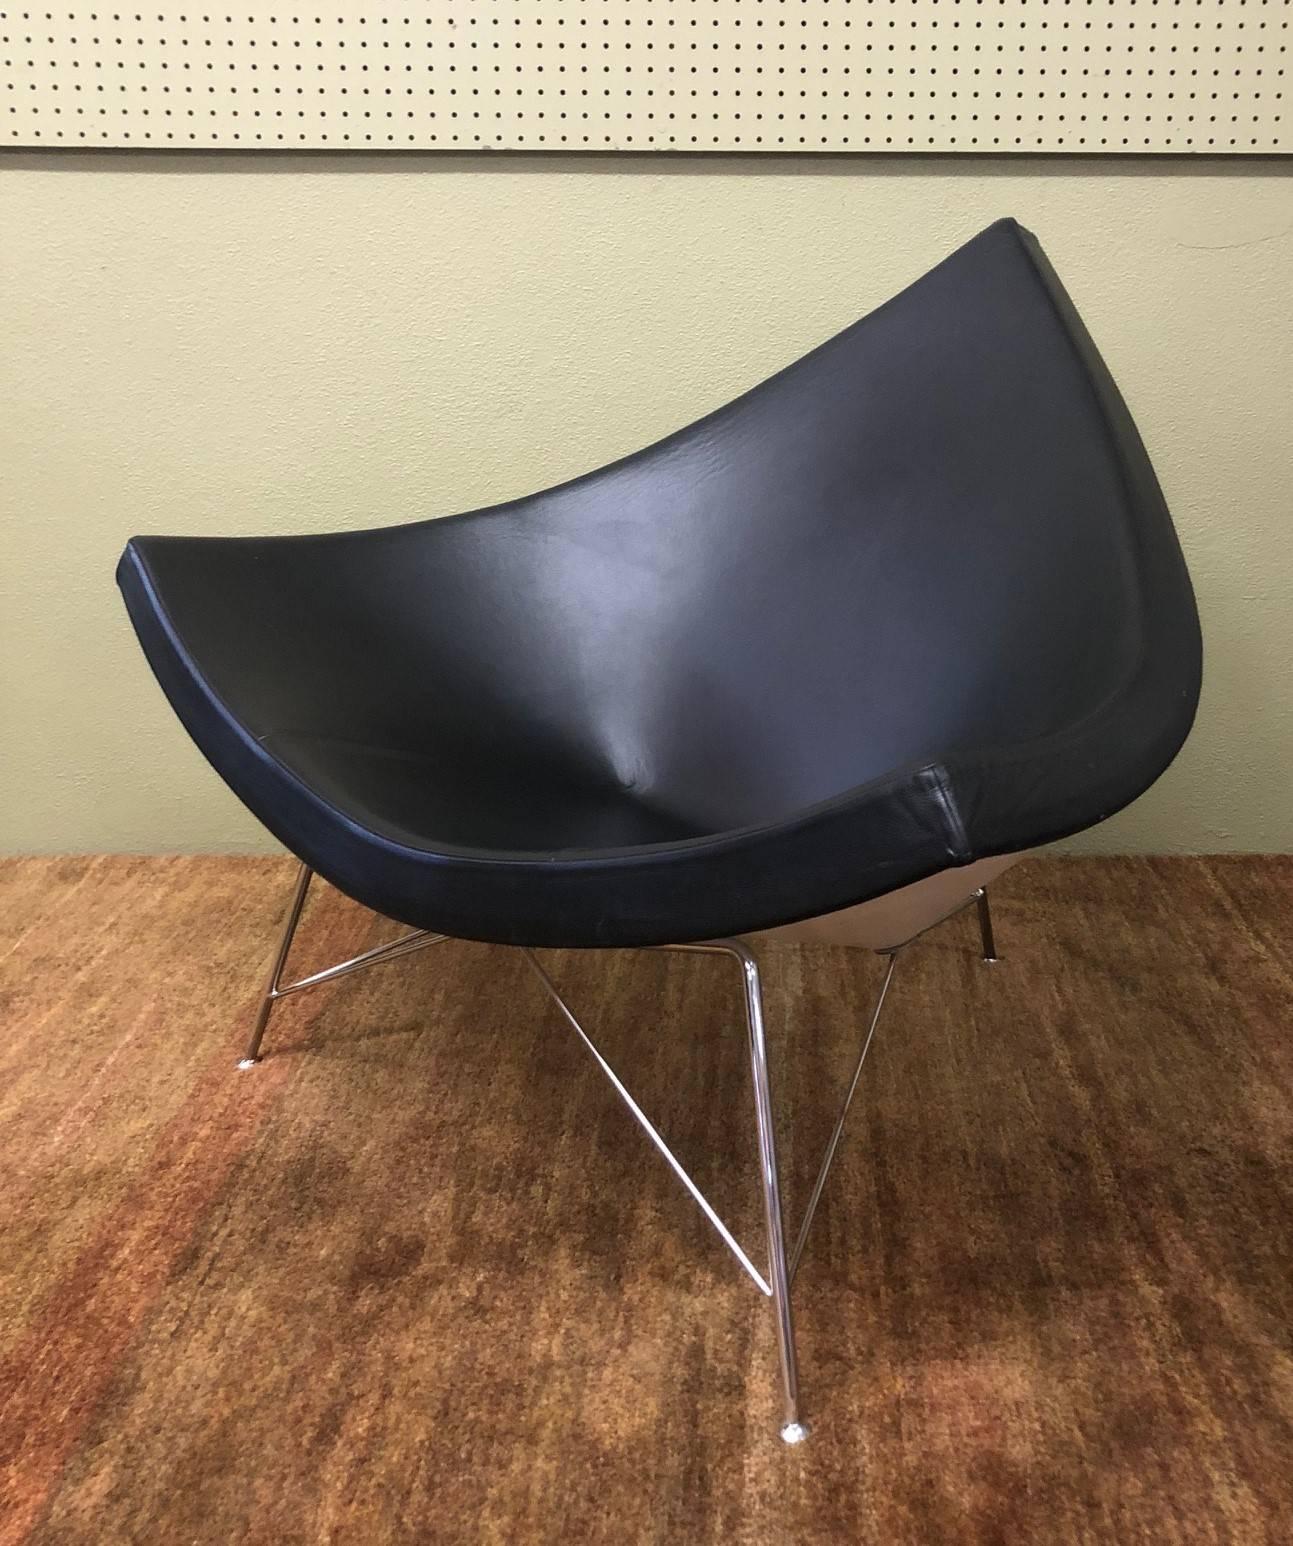 Named for its shell-fragment shape that invites lounging in a variety of positions, the Coconut Chair is clever in how it integrates seat, back and arms into one simple form. This is an authentic Coconut chair by George Nelson for Herman Miller made